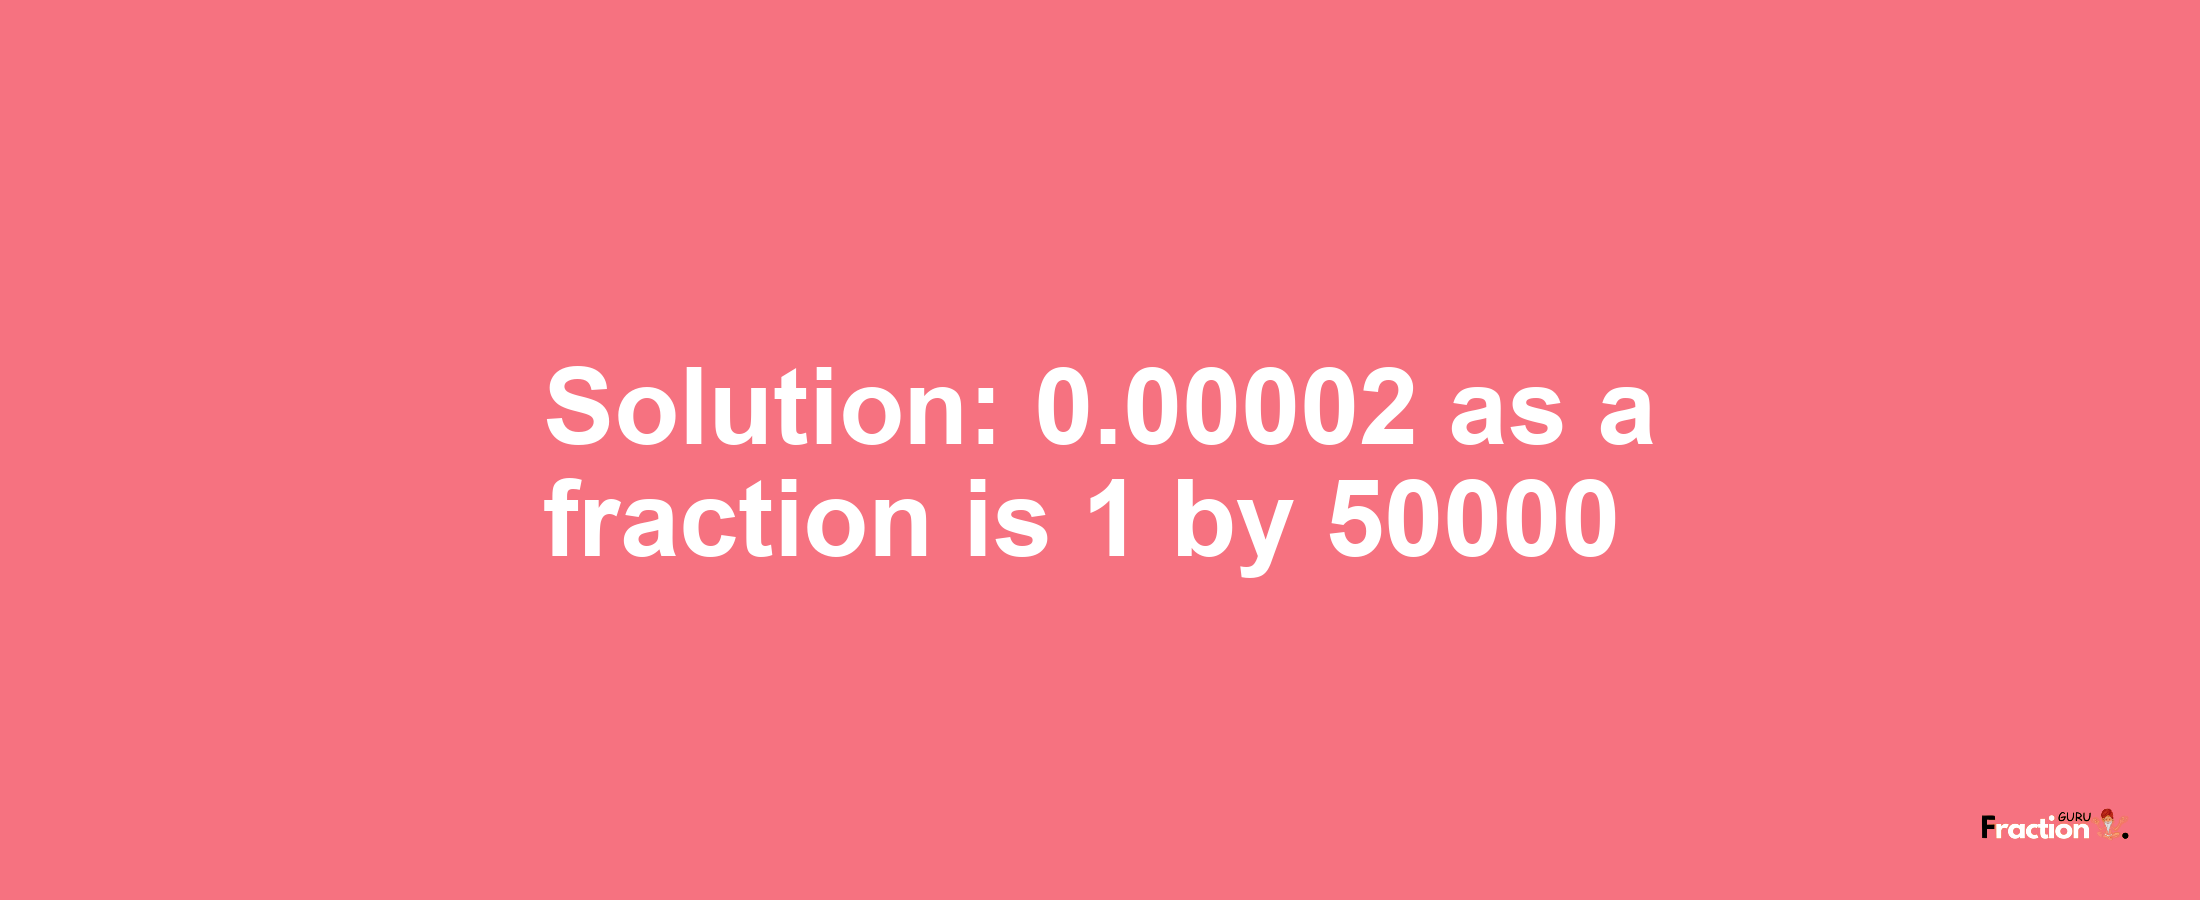 Solution:0.00002 as a fraction is 1/50000